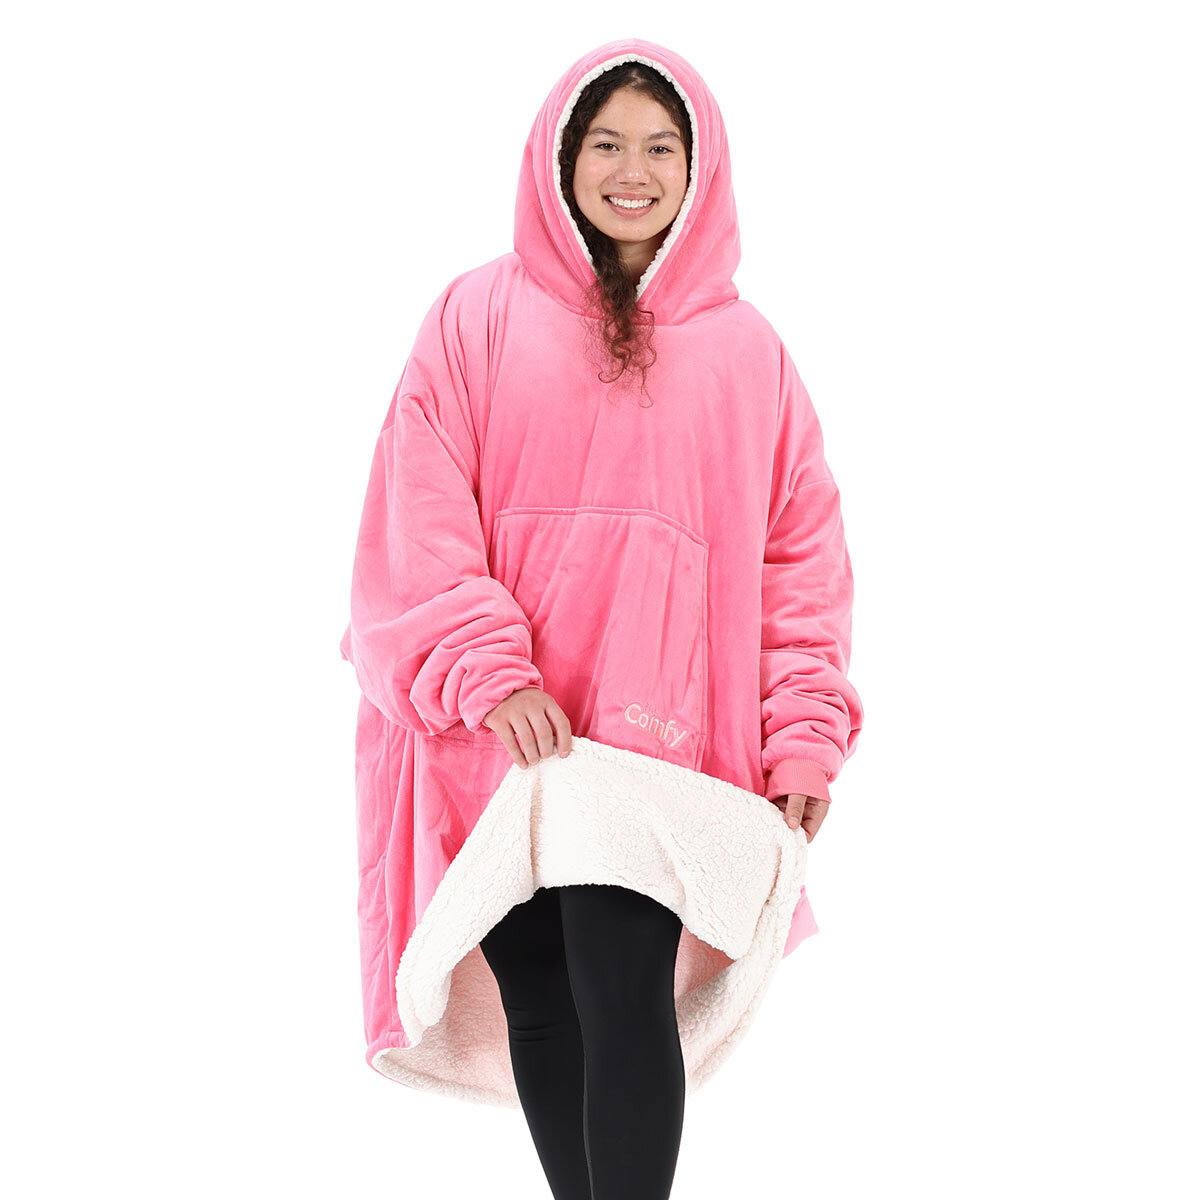 The Comfy® Original Wearable Blanket in 3 Colours | Costc